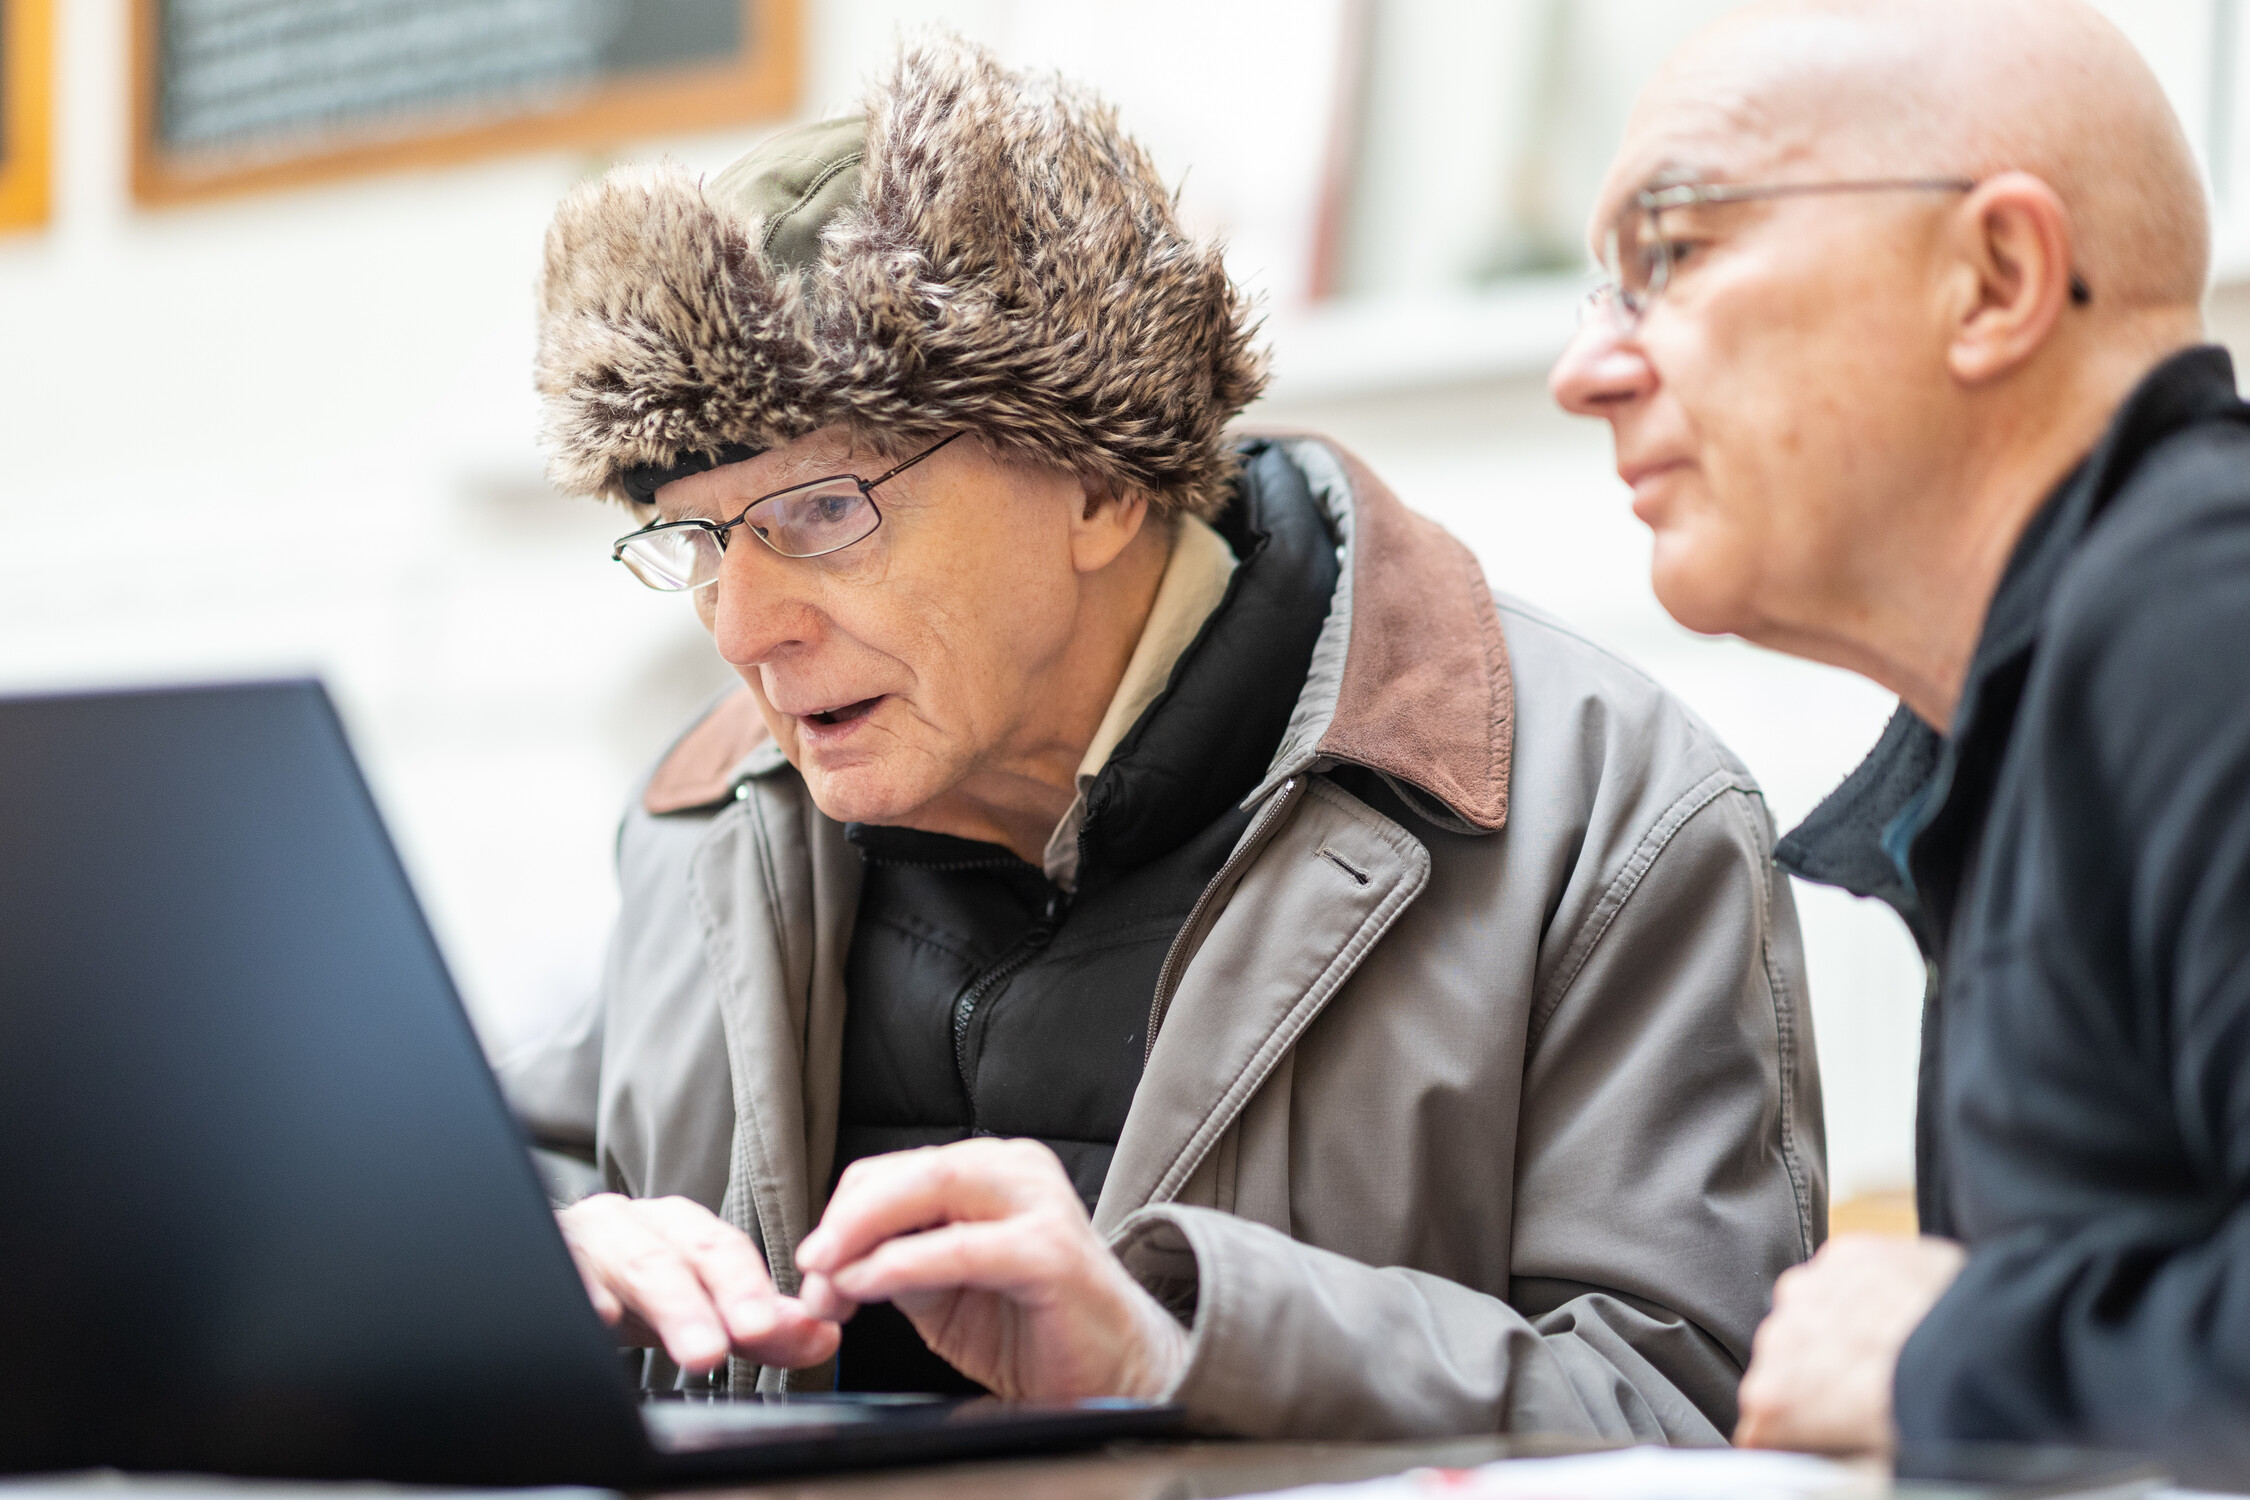 Call for action as shift to digital banking leaves older people feeling deserted